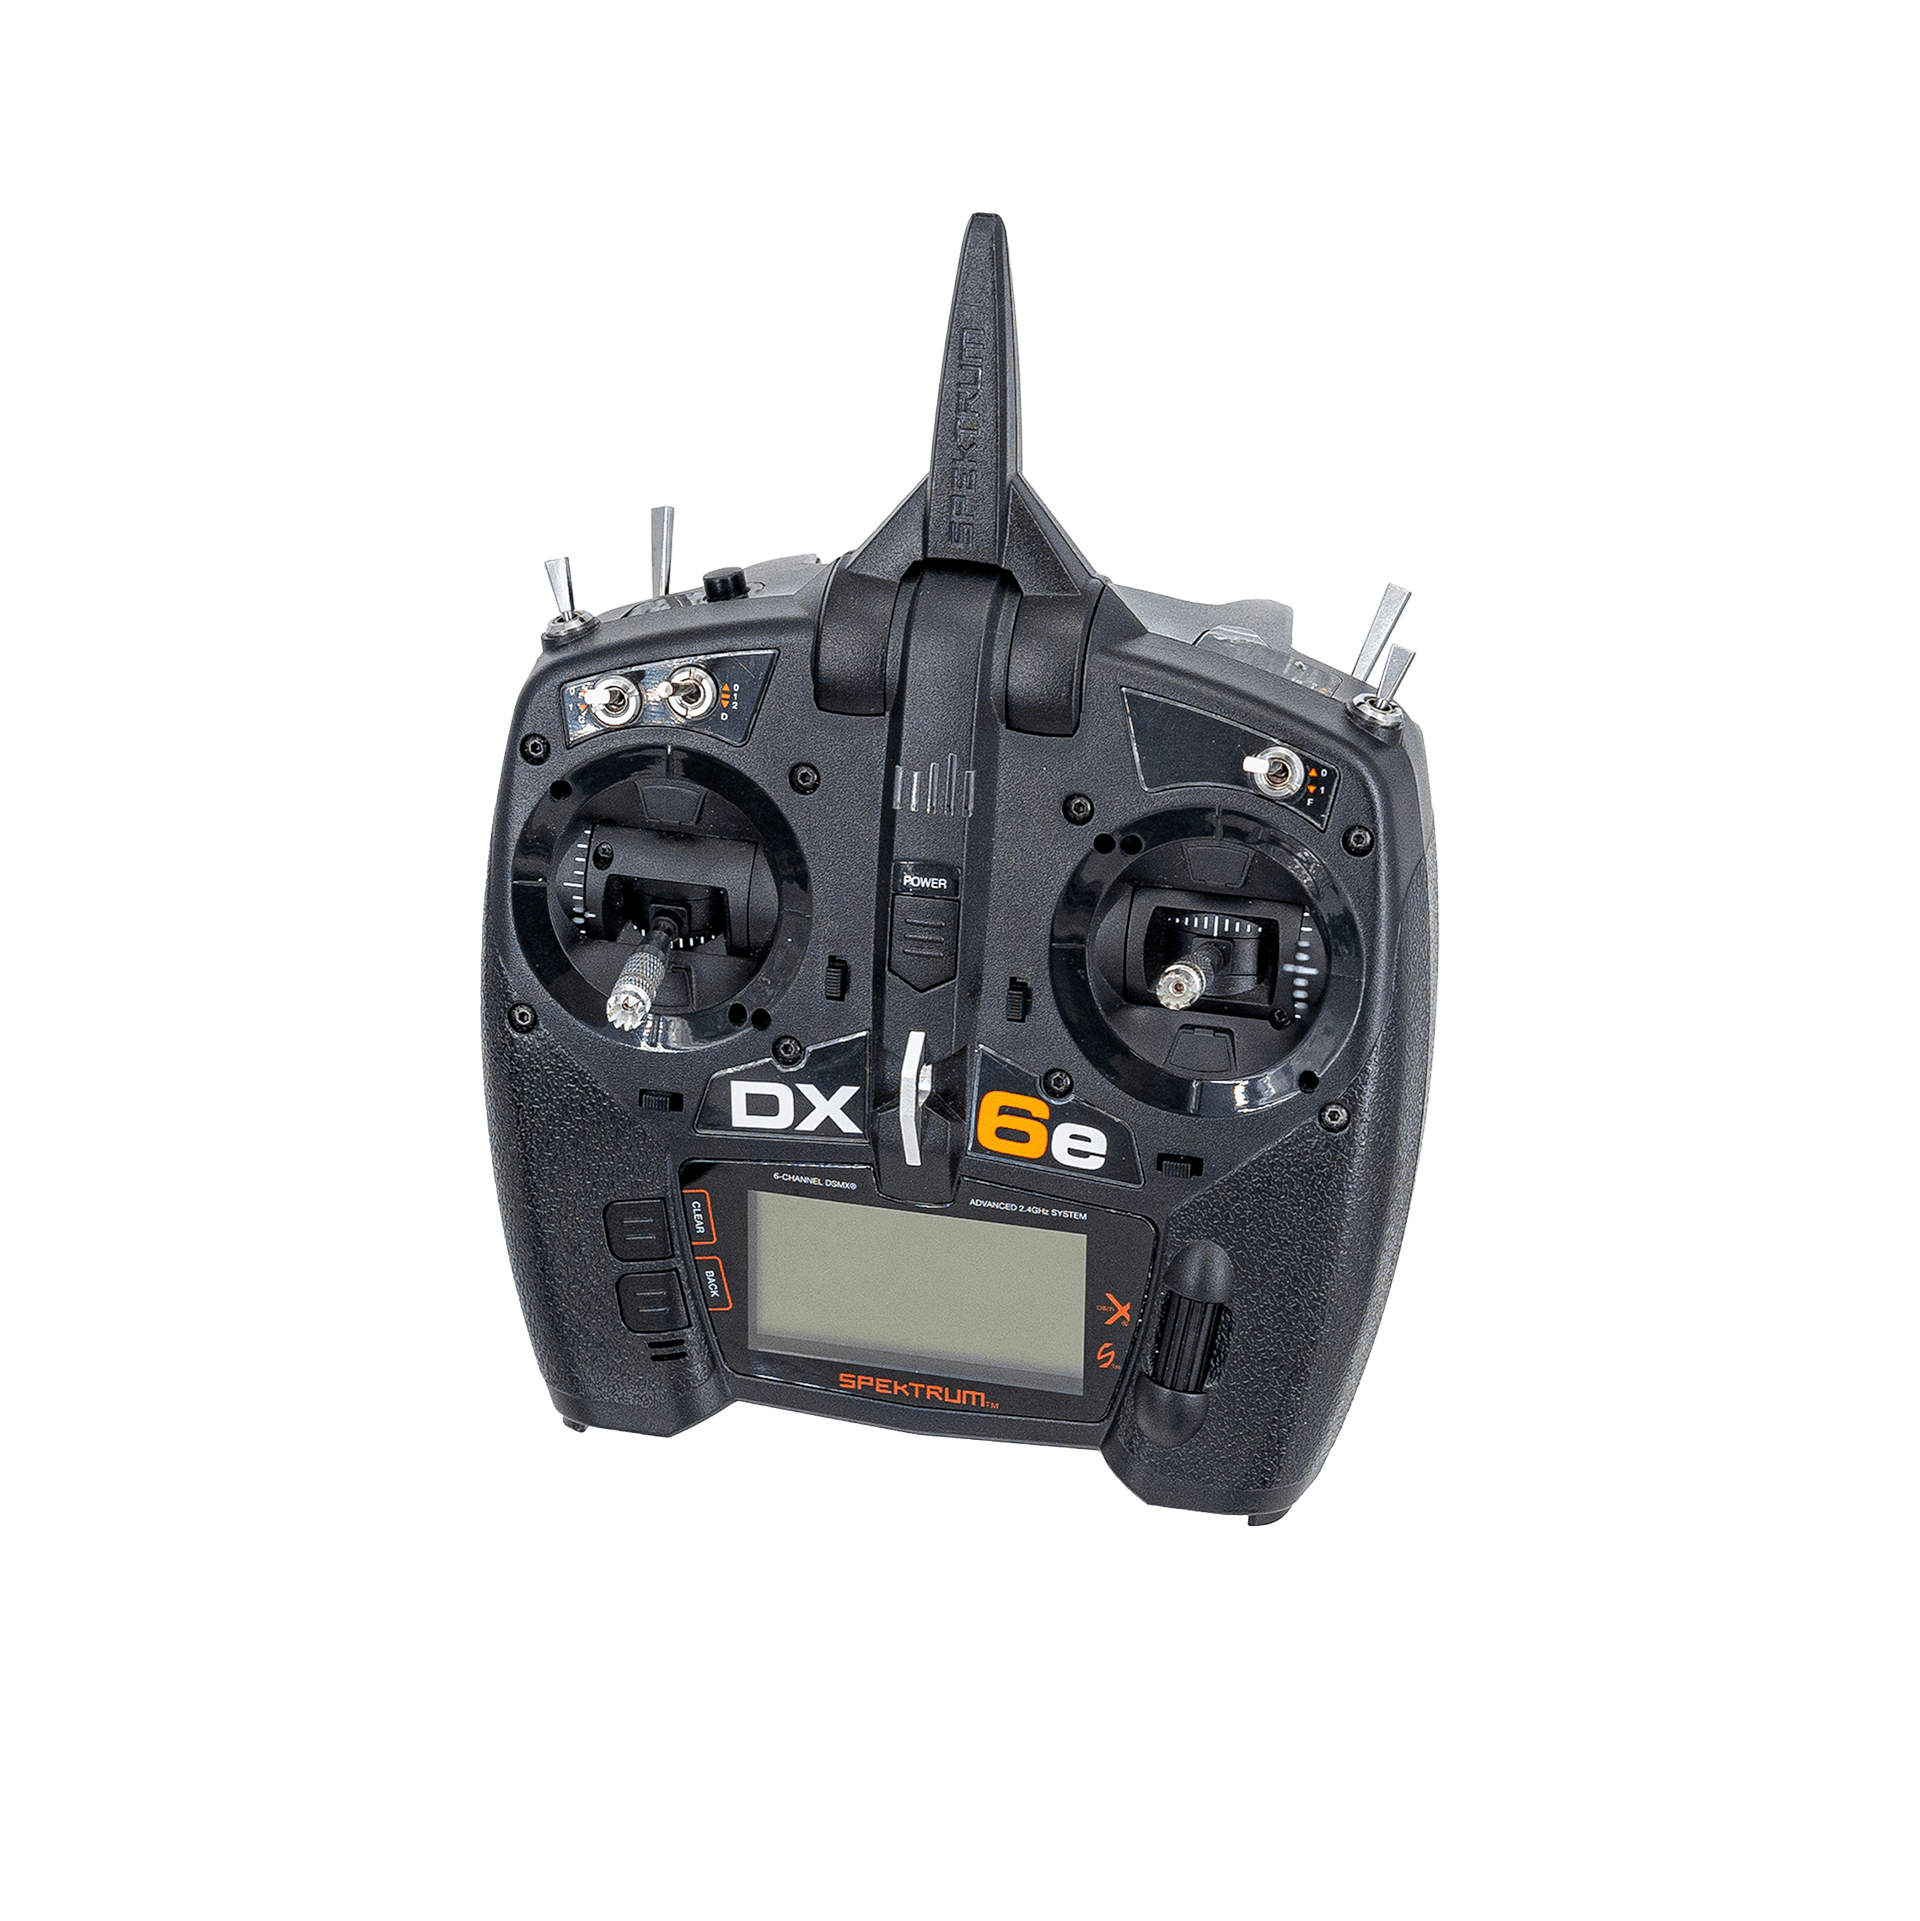 ModalAI, Inc. Drone VOXL m500 - Development Drone for PX4 GPS-Denied Navigation and Obstacle Avoidance